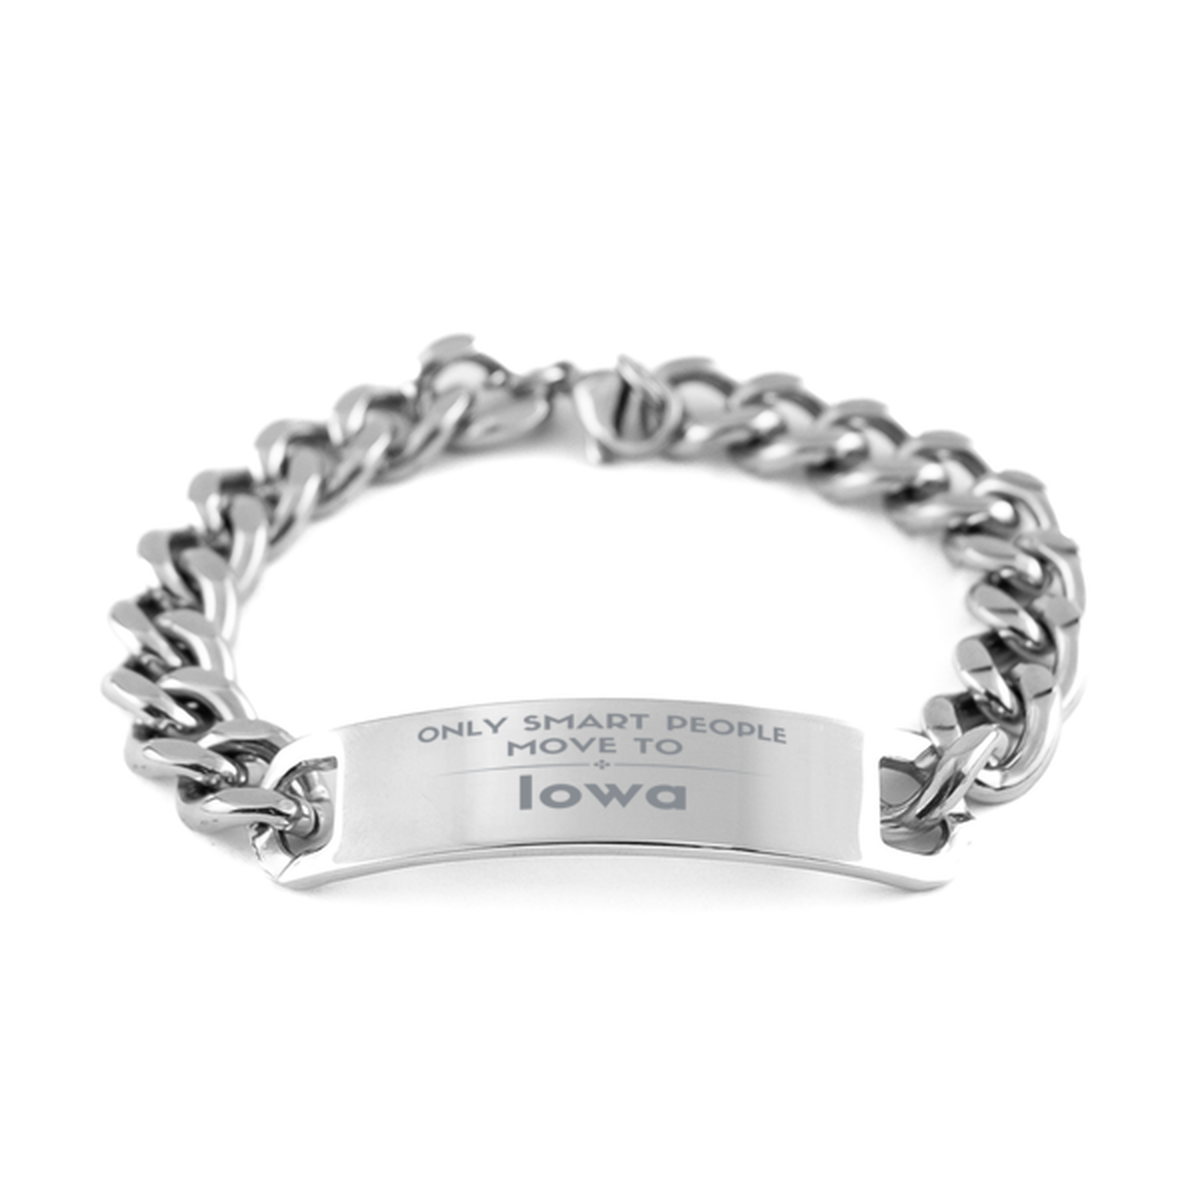 Only smart people move to Iowa Cuban Chain Stainless Steel Bracelet, Gag Gifts For Iowa, Move to Iowa Gifts for Friends Coworker Funny Saying Quote